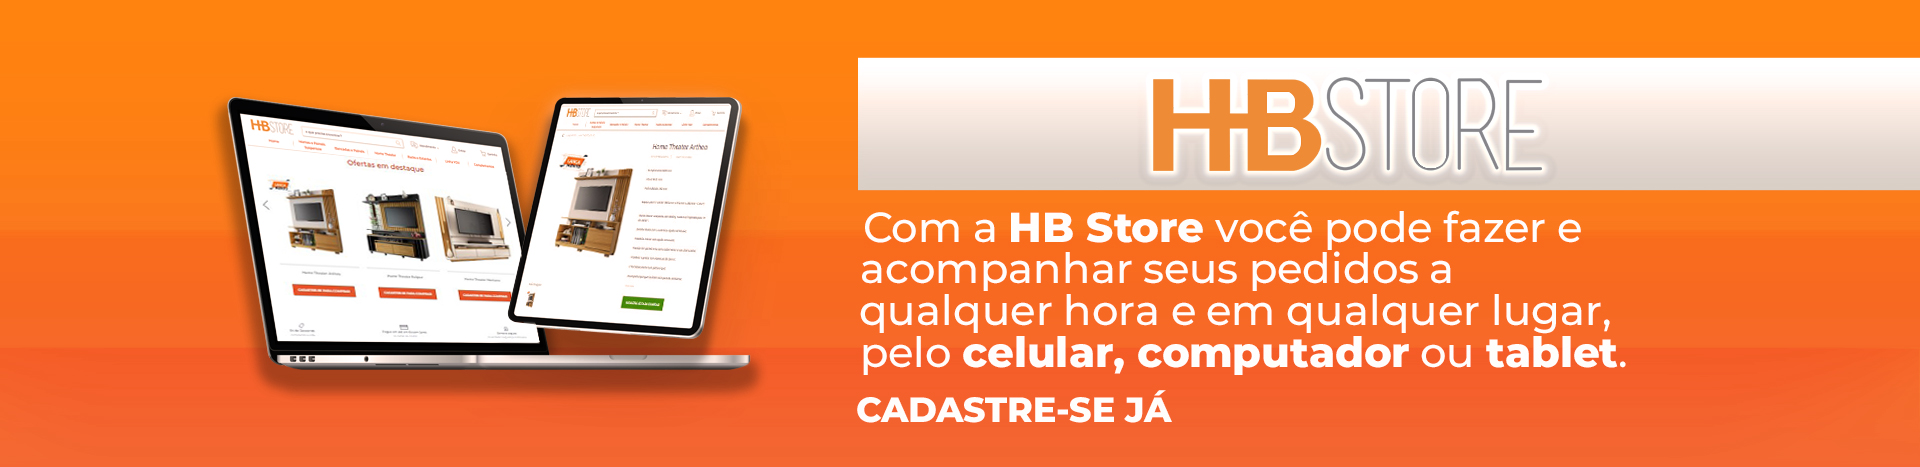 HB Store